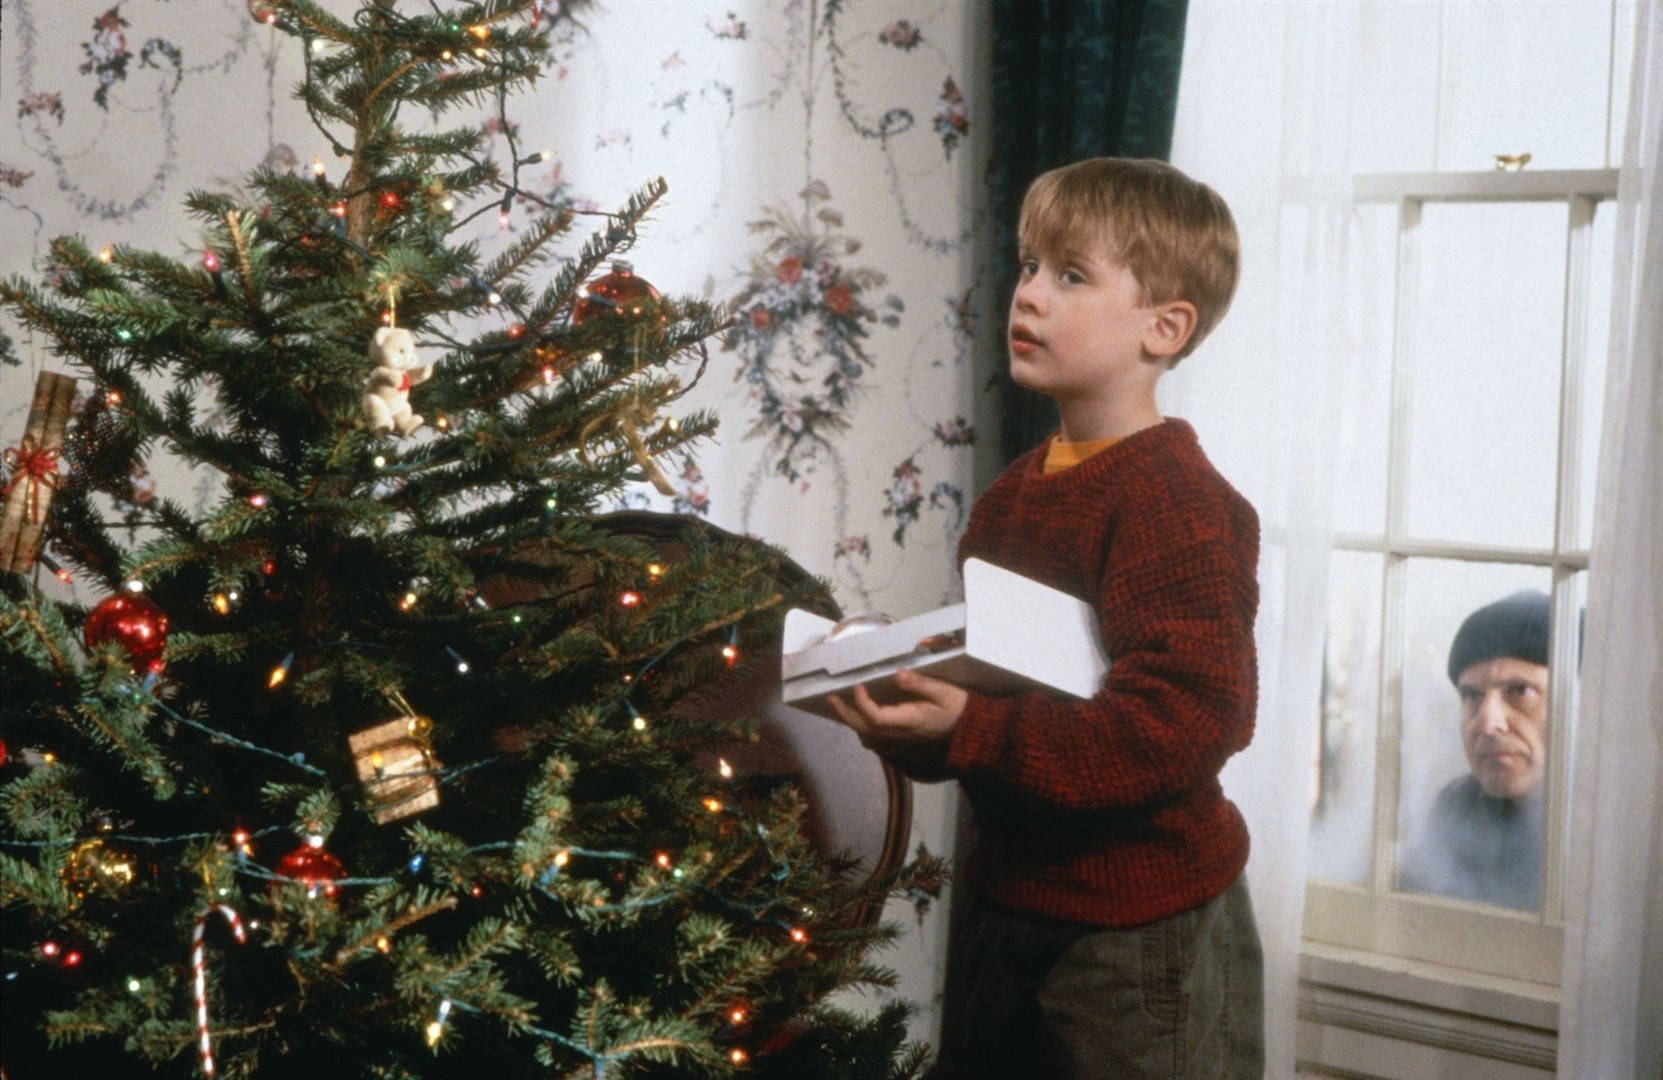 Home Alone is among the festive films being screened.